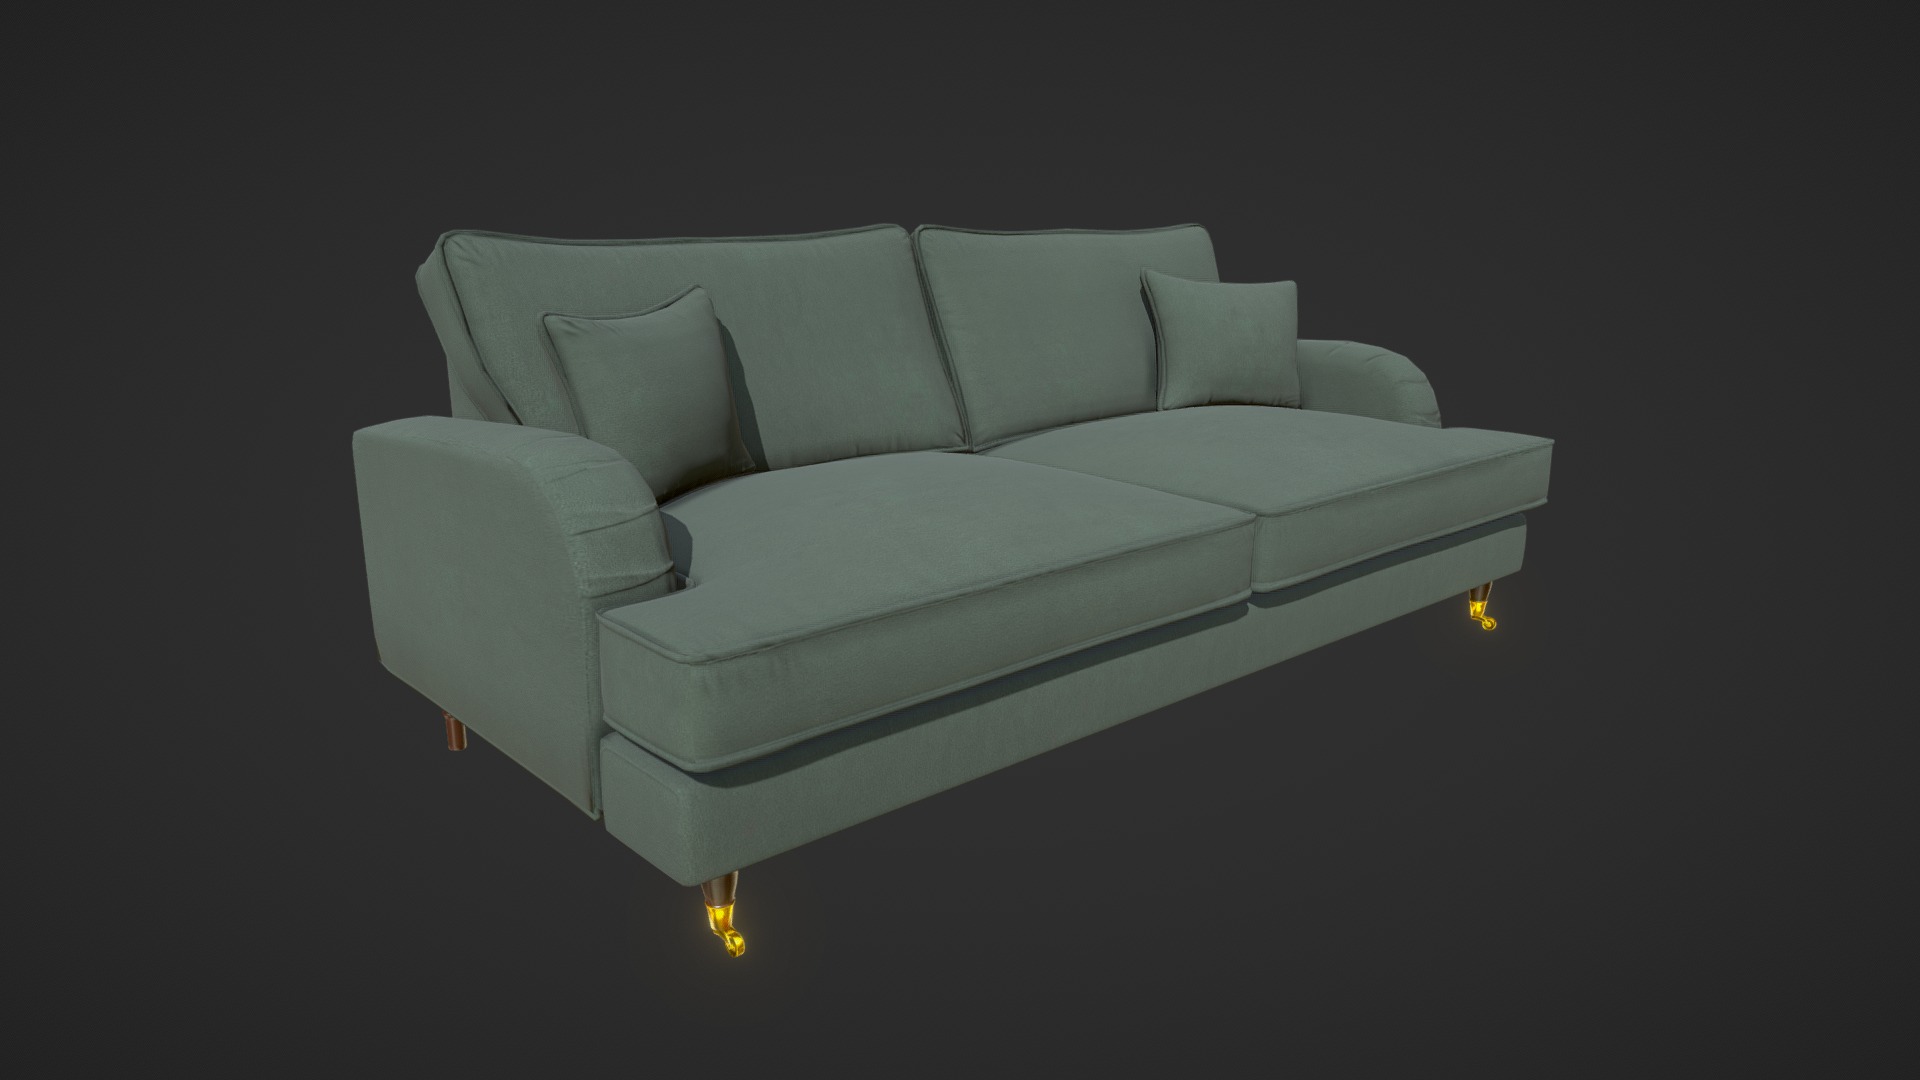 3D model Sofa - This is a 3D model of the Sofa. The 3D model is about a couch with a light on it.